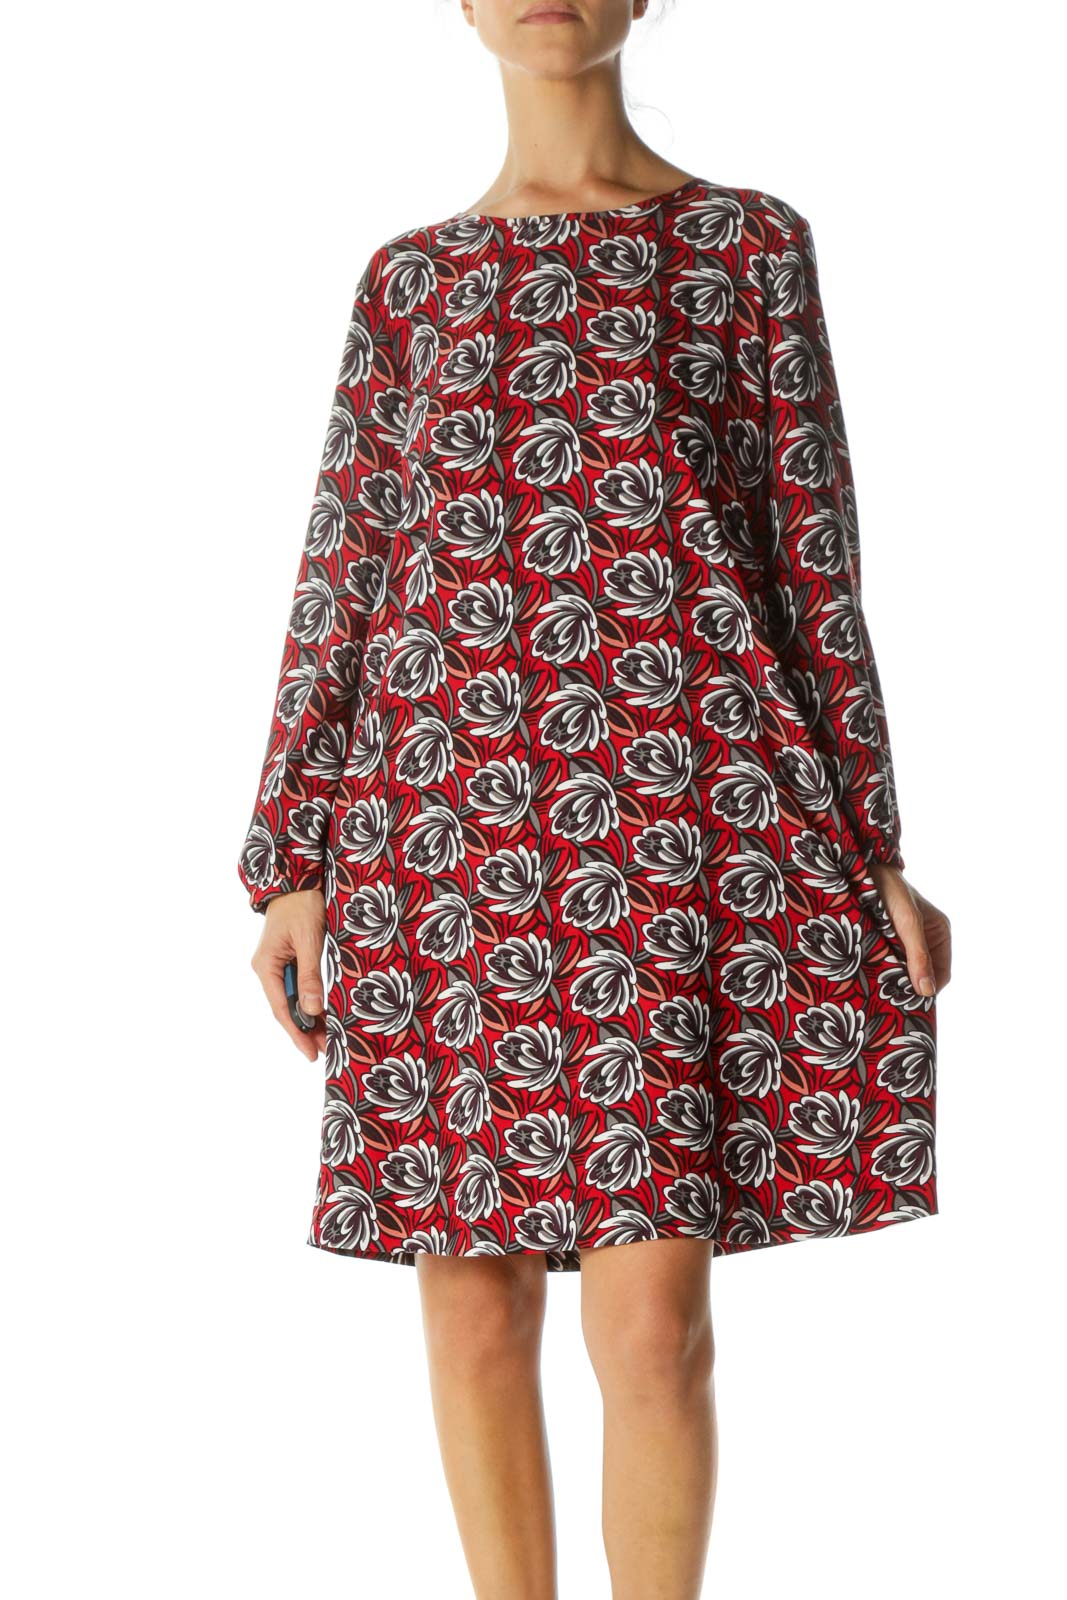 LOFT - Red White Purple Floral Print Long Sleeve Stretch Day Dress ...